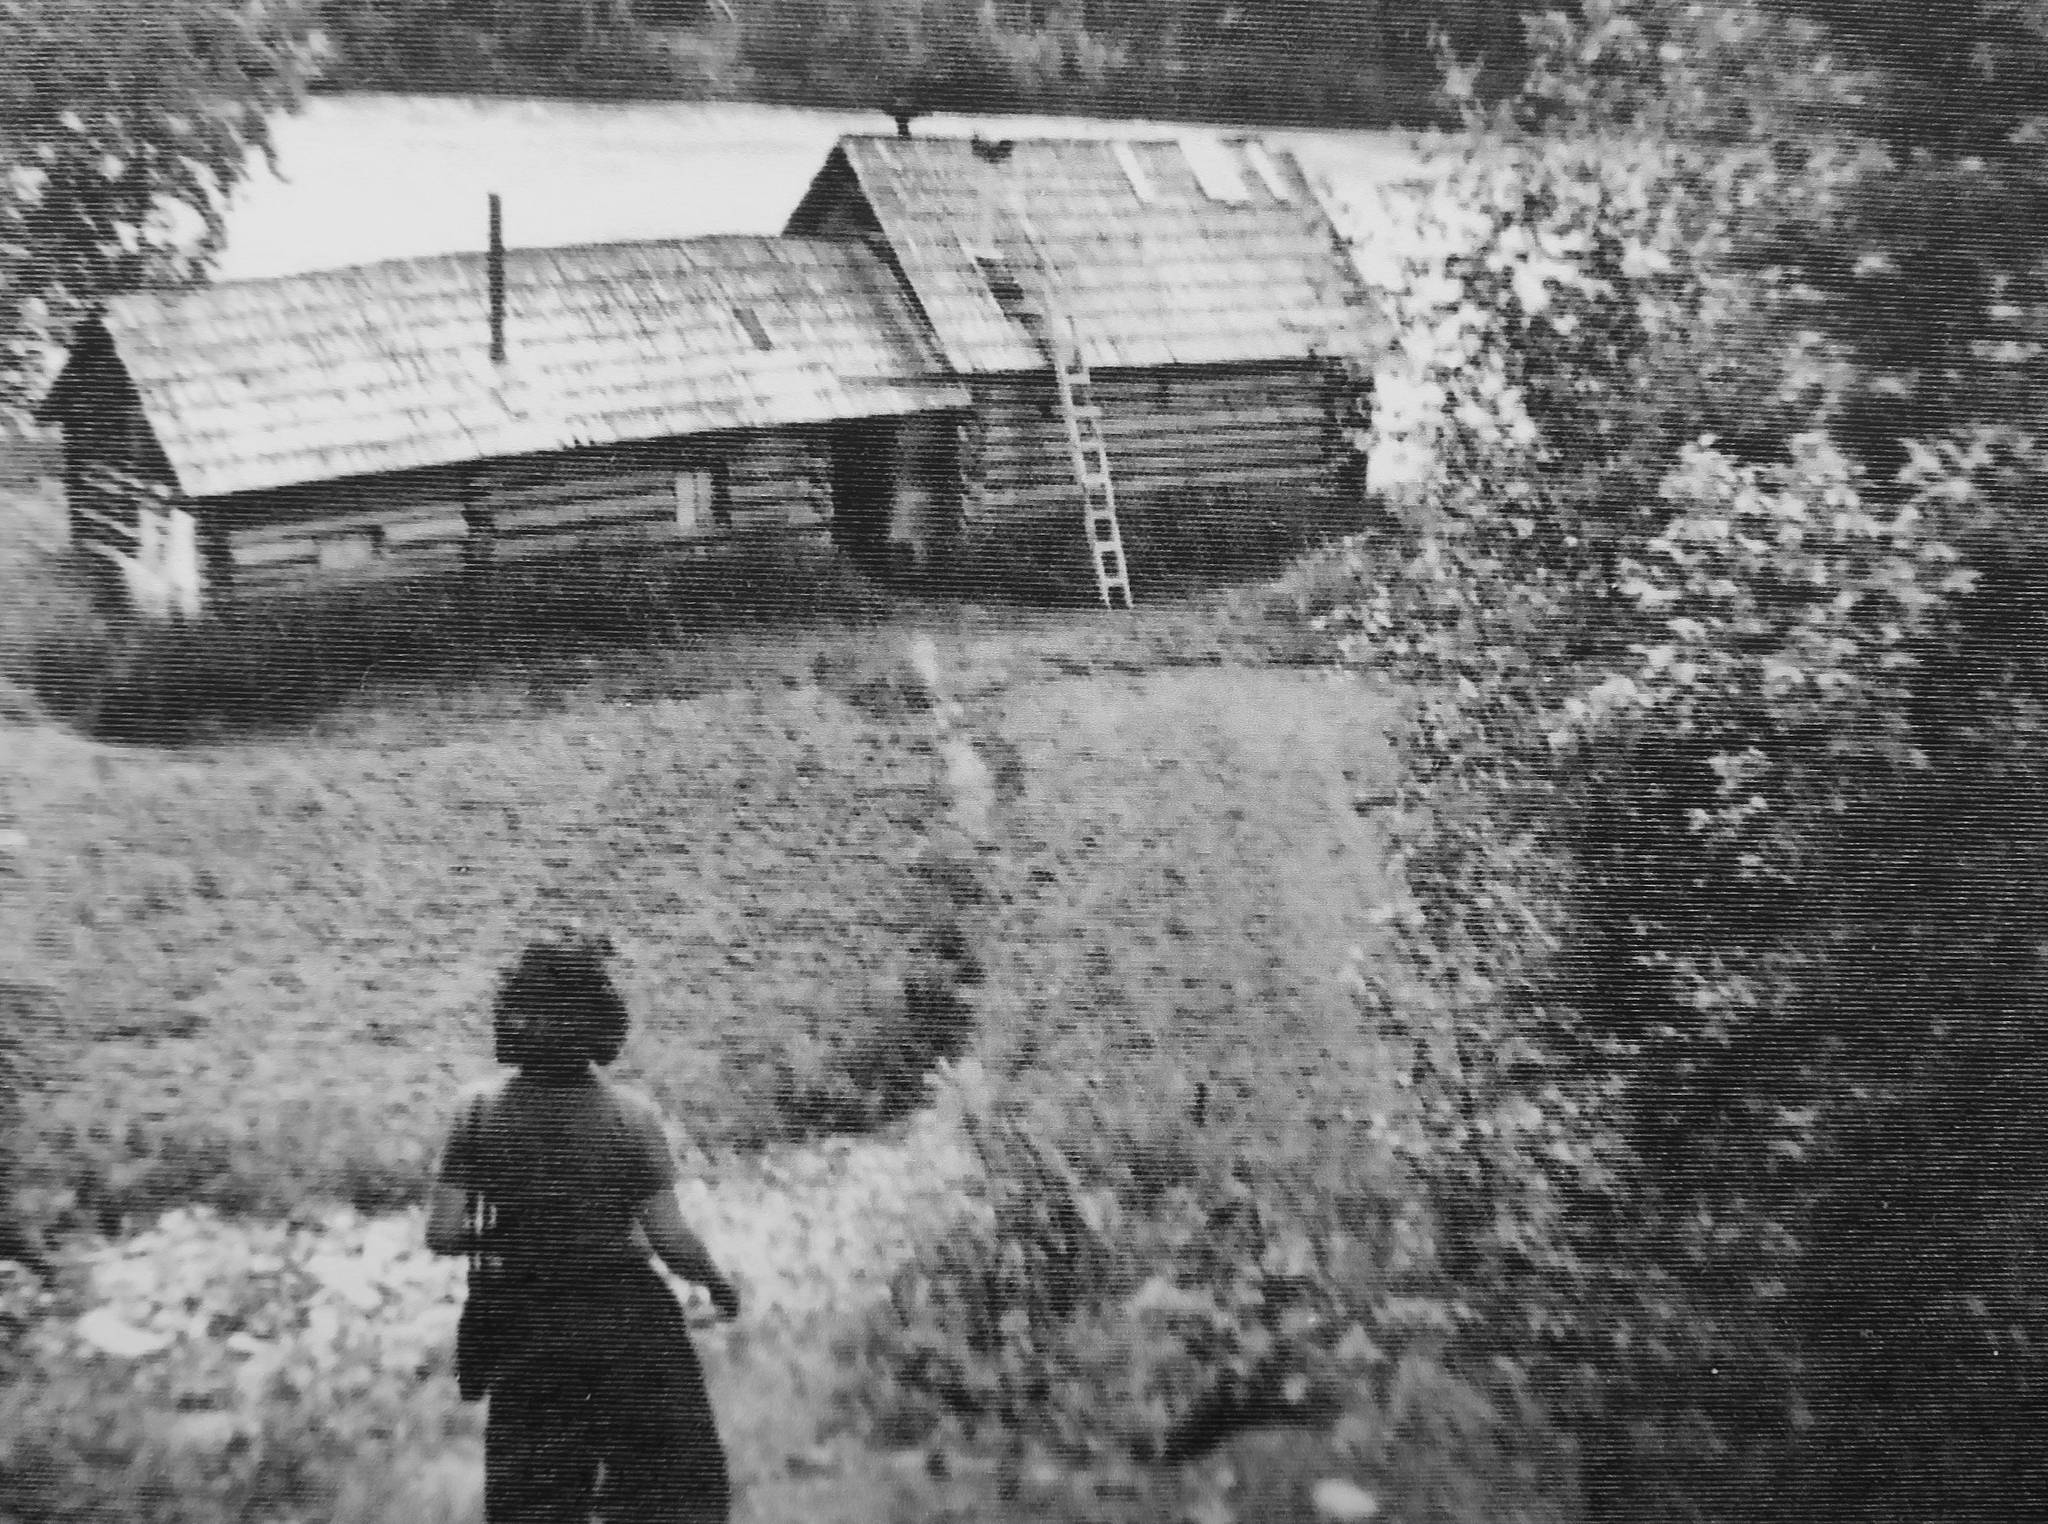 A friend of the two Jims approaches their cabin near Schooner Bend on the Kenai River, circa 1940s. (Photo courtesy of Mona Painter)